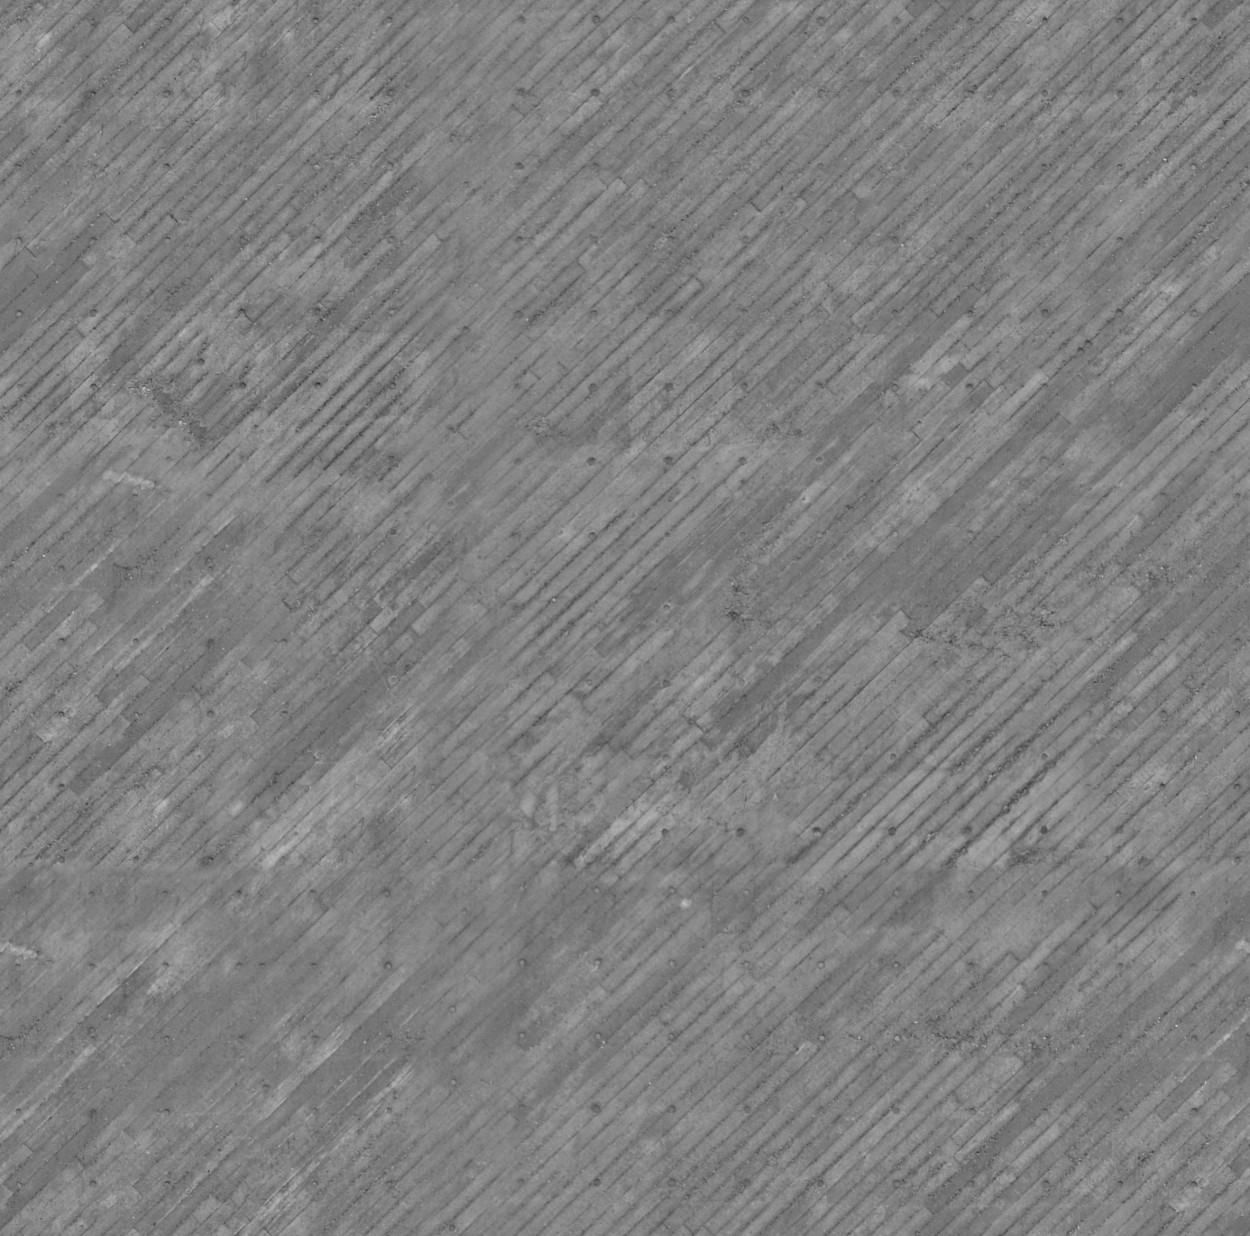 A seamless boardmarked concrete angled texture for use in architectural drawings and 3D models